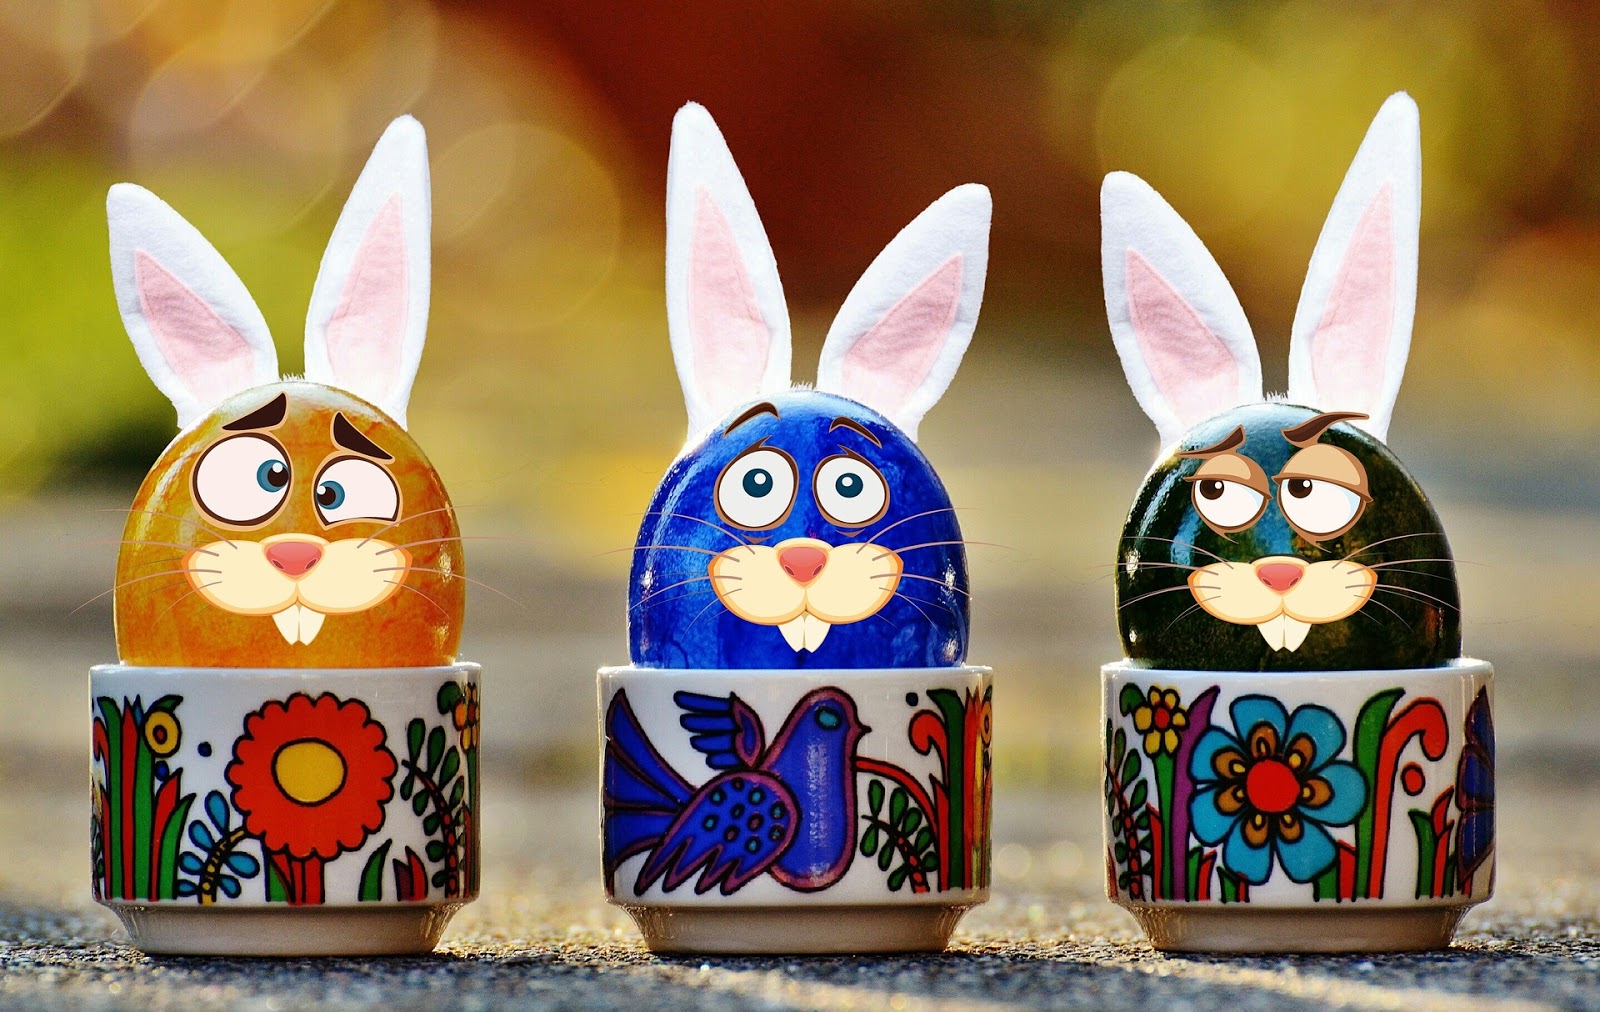 New Easter Traditions to Incorporate into Your Family